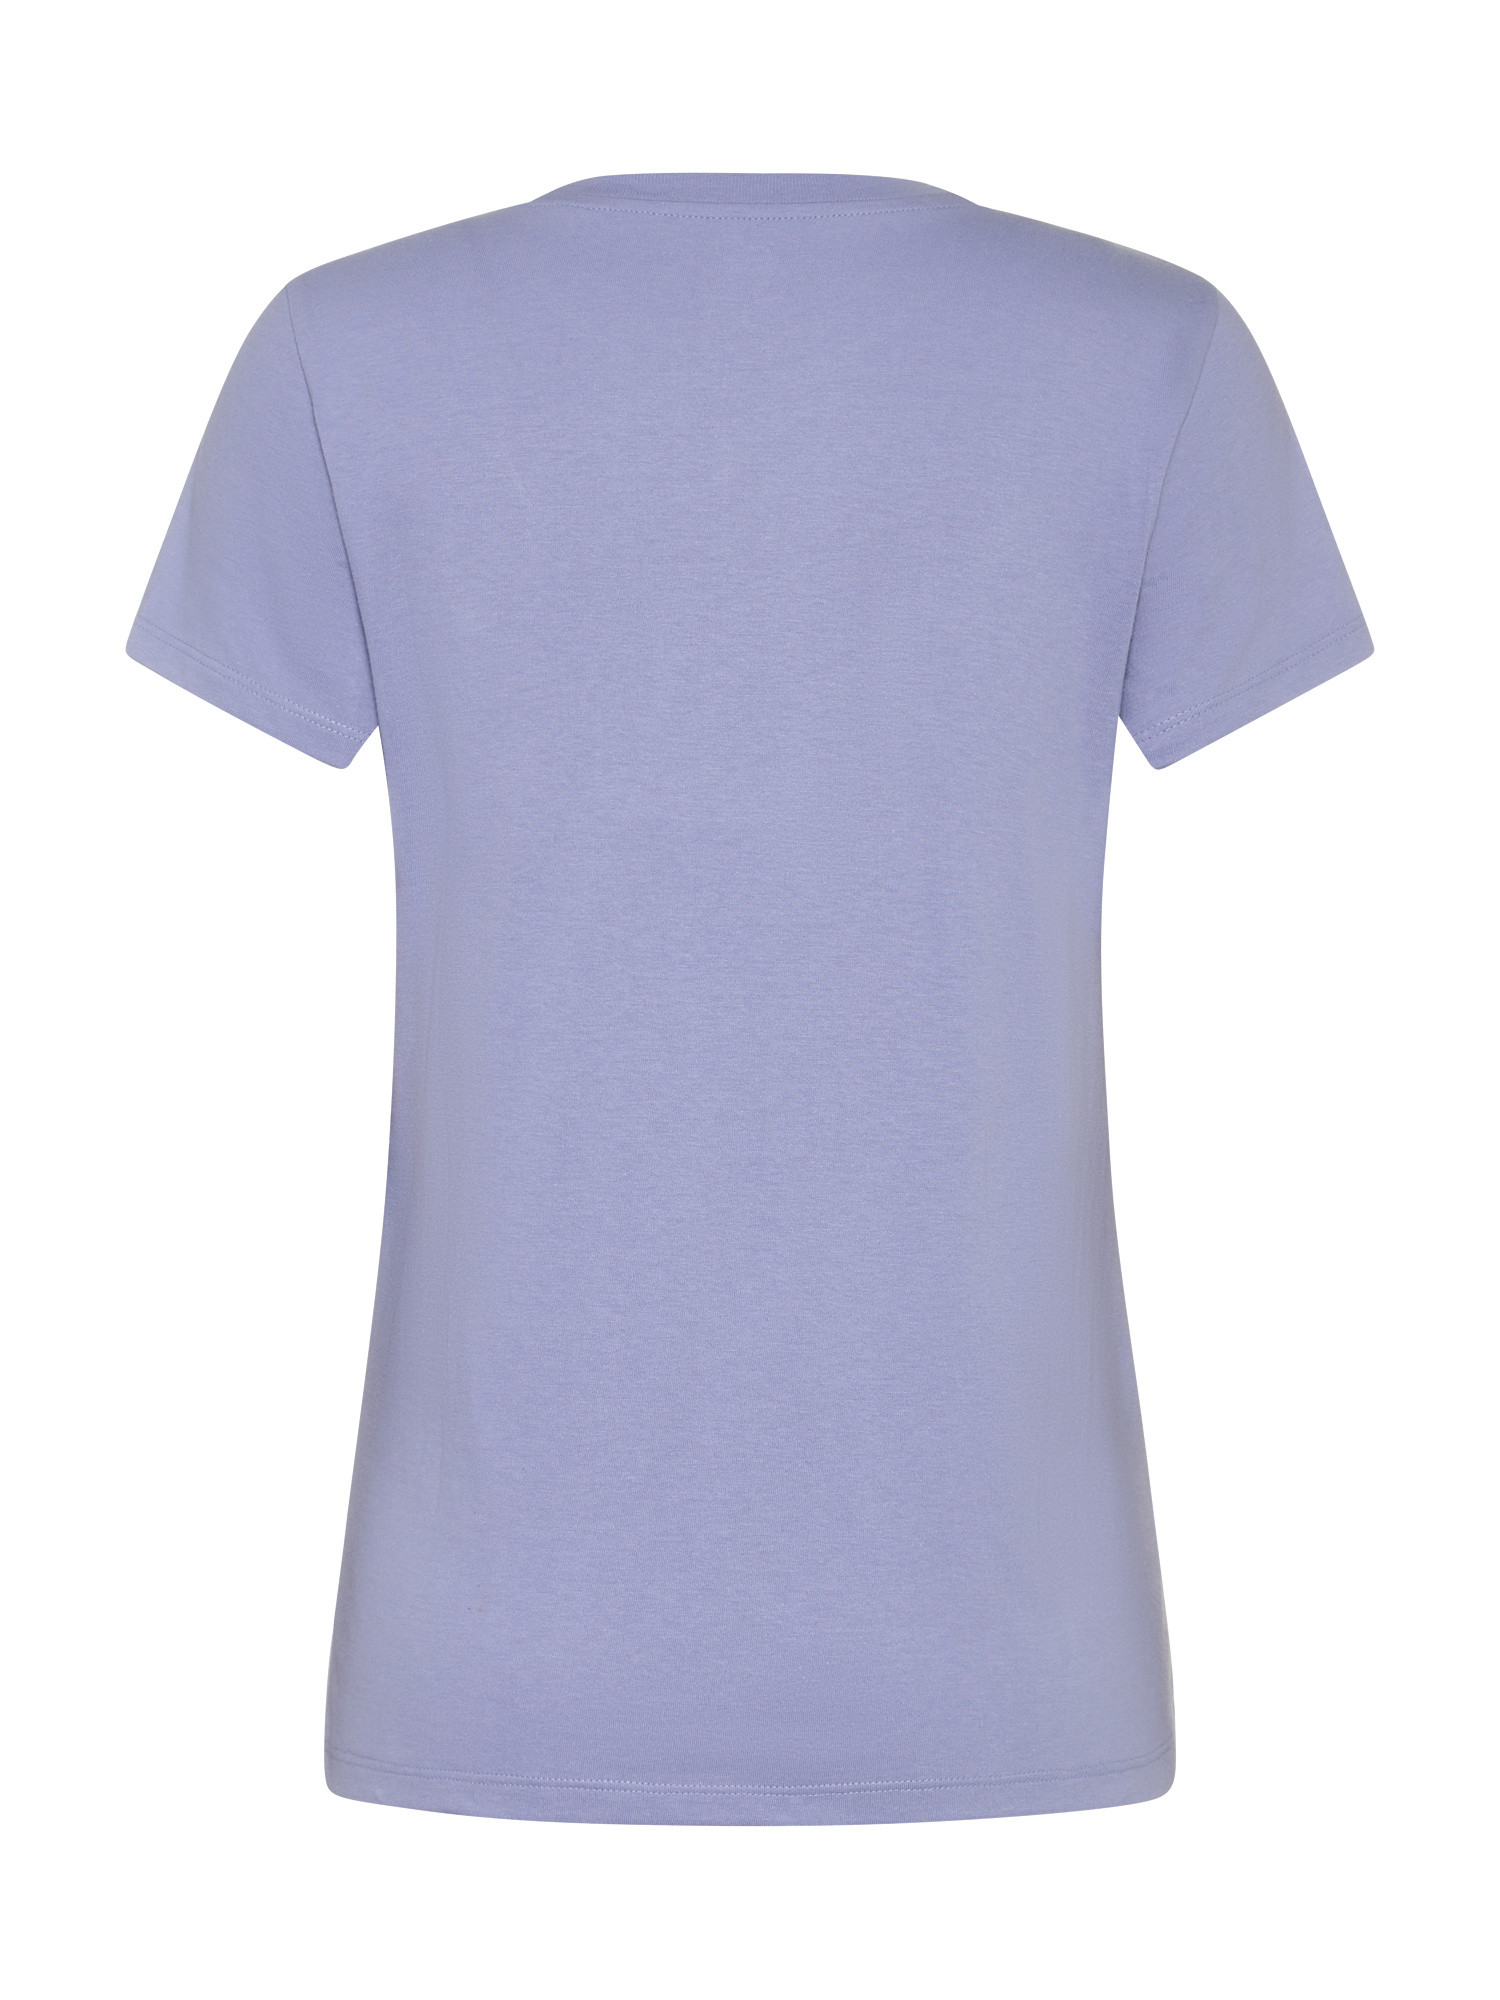 Levi's - Cotton T-shirt with logo, Purple, large image number 1